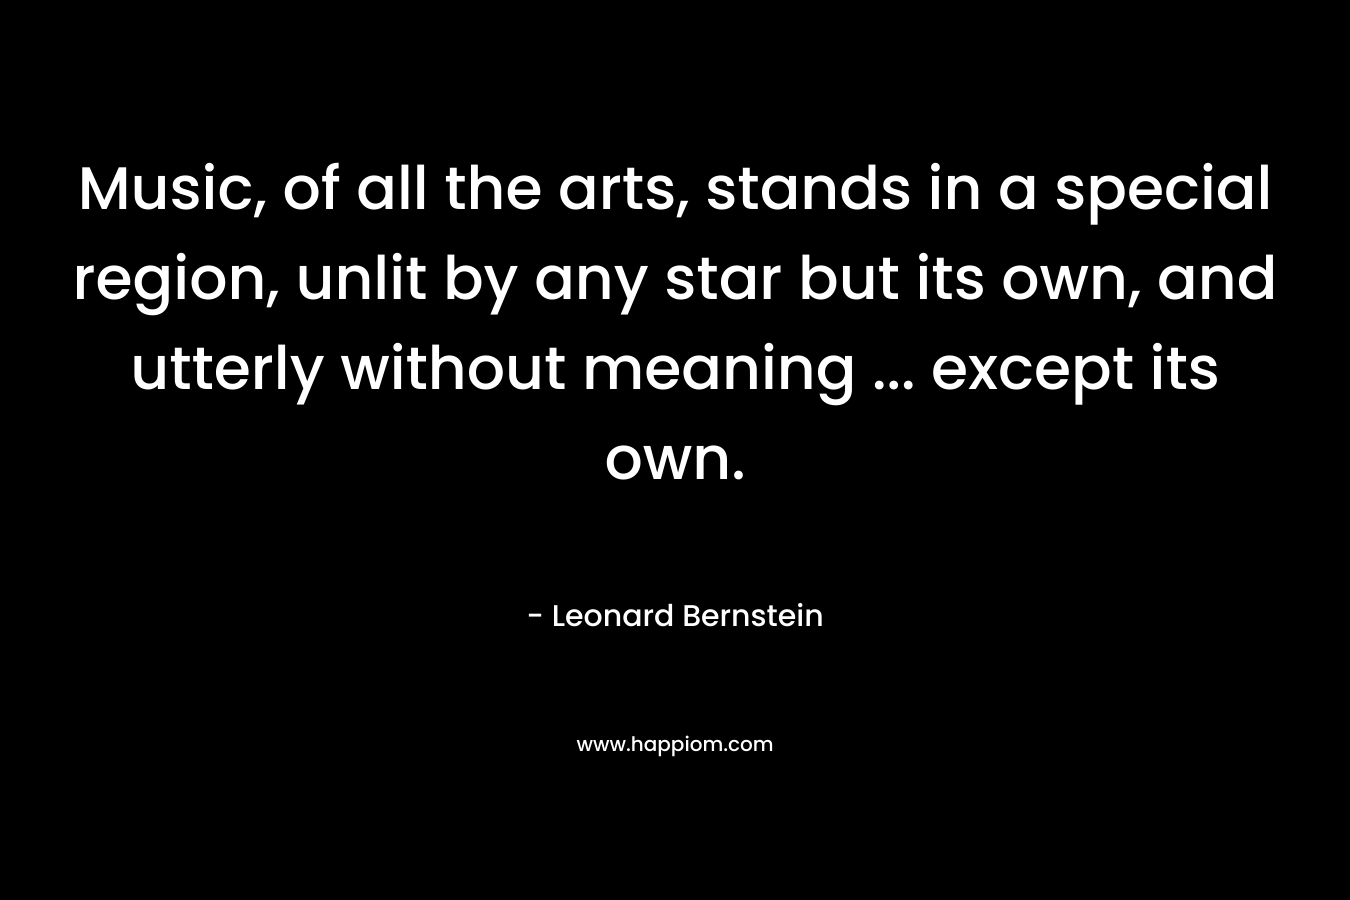 Music, of all the arts, stands in a special region, unlit by any star but its own, and utterly without meaning … except its own. – Leonard Bernstein